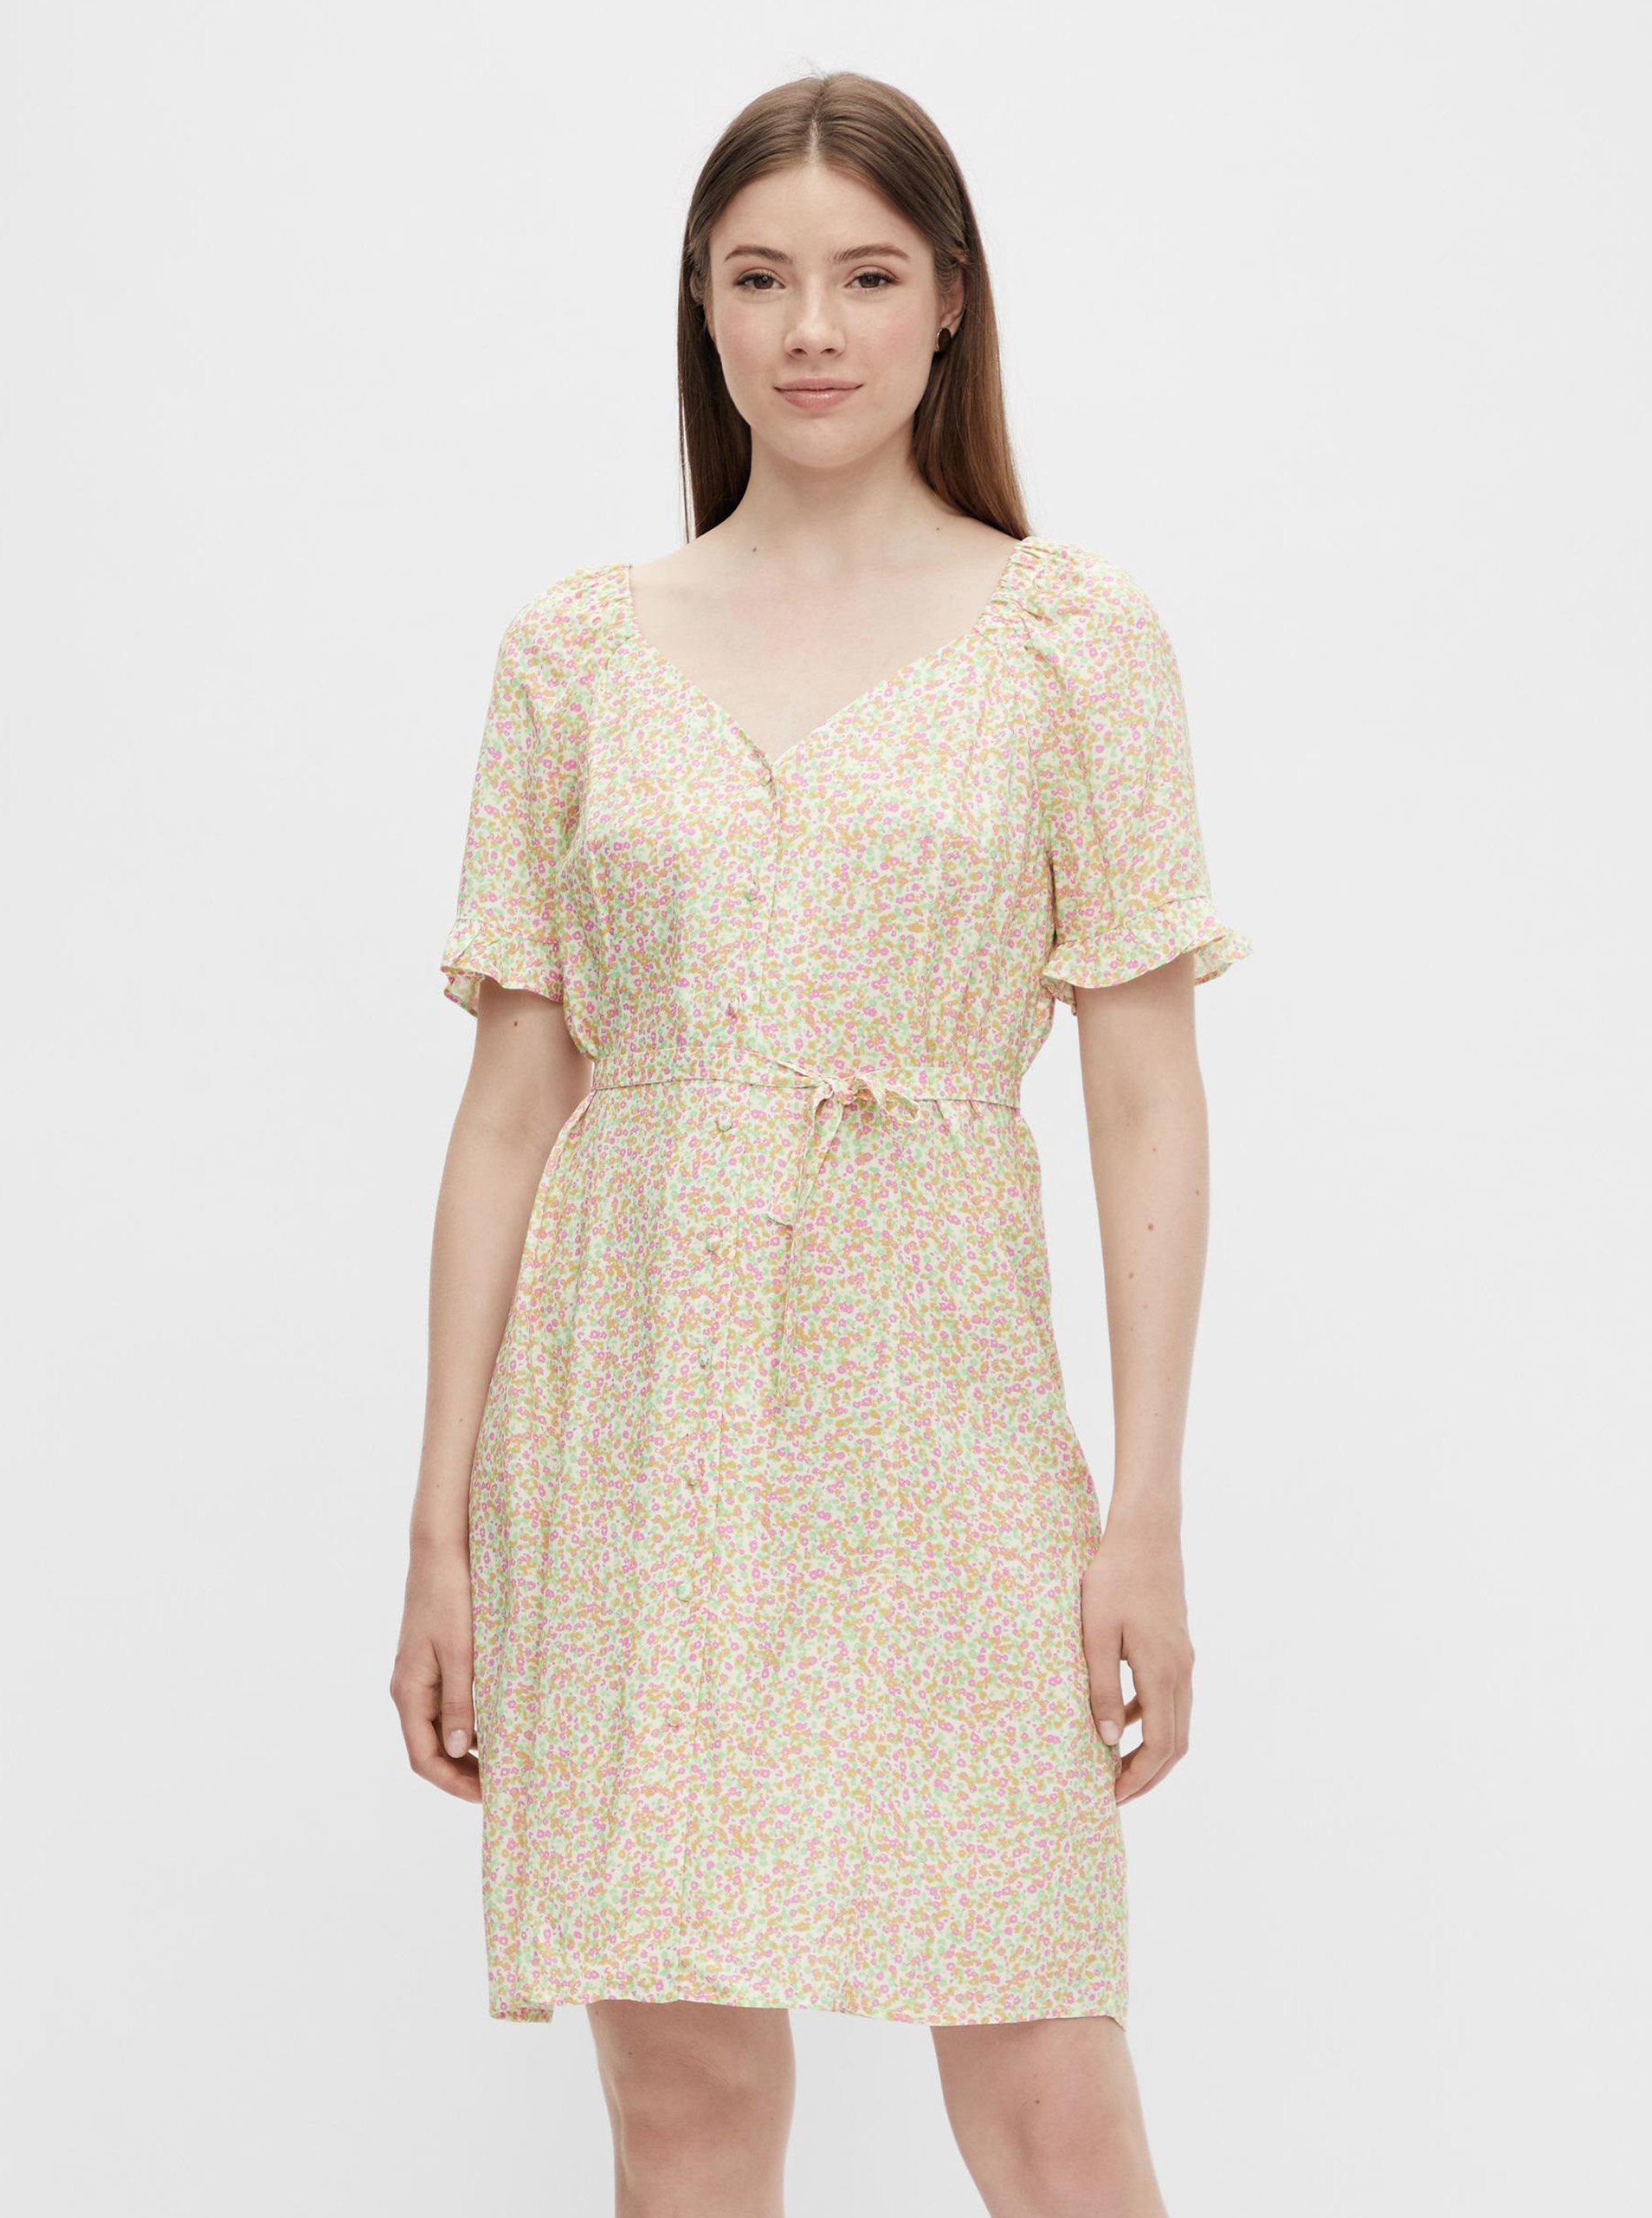 Cream Floral Dress With Tie Pieces Timberly - Women